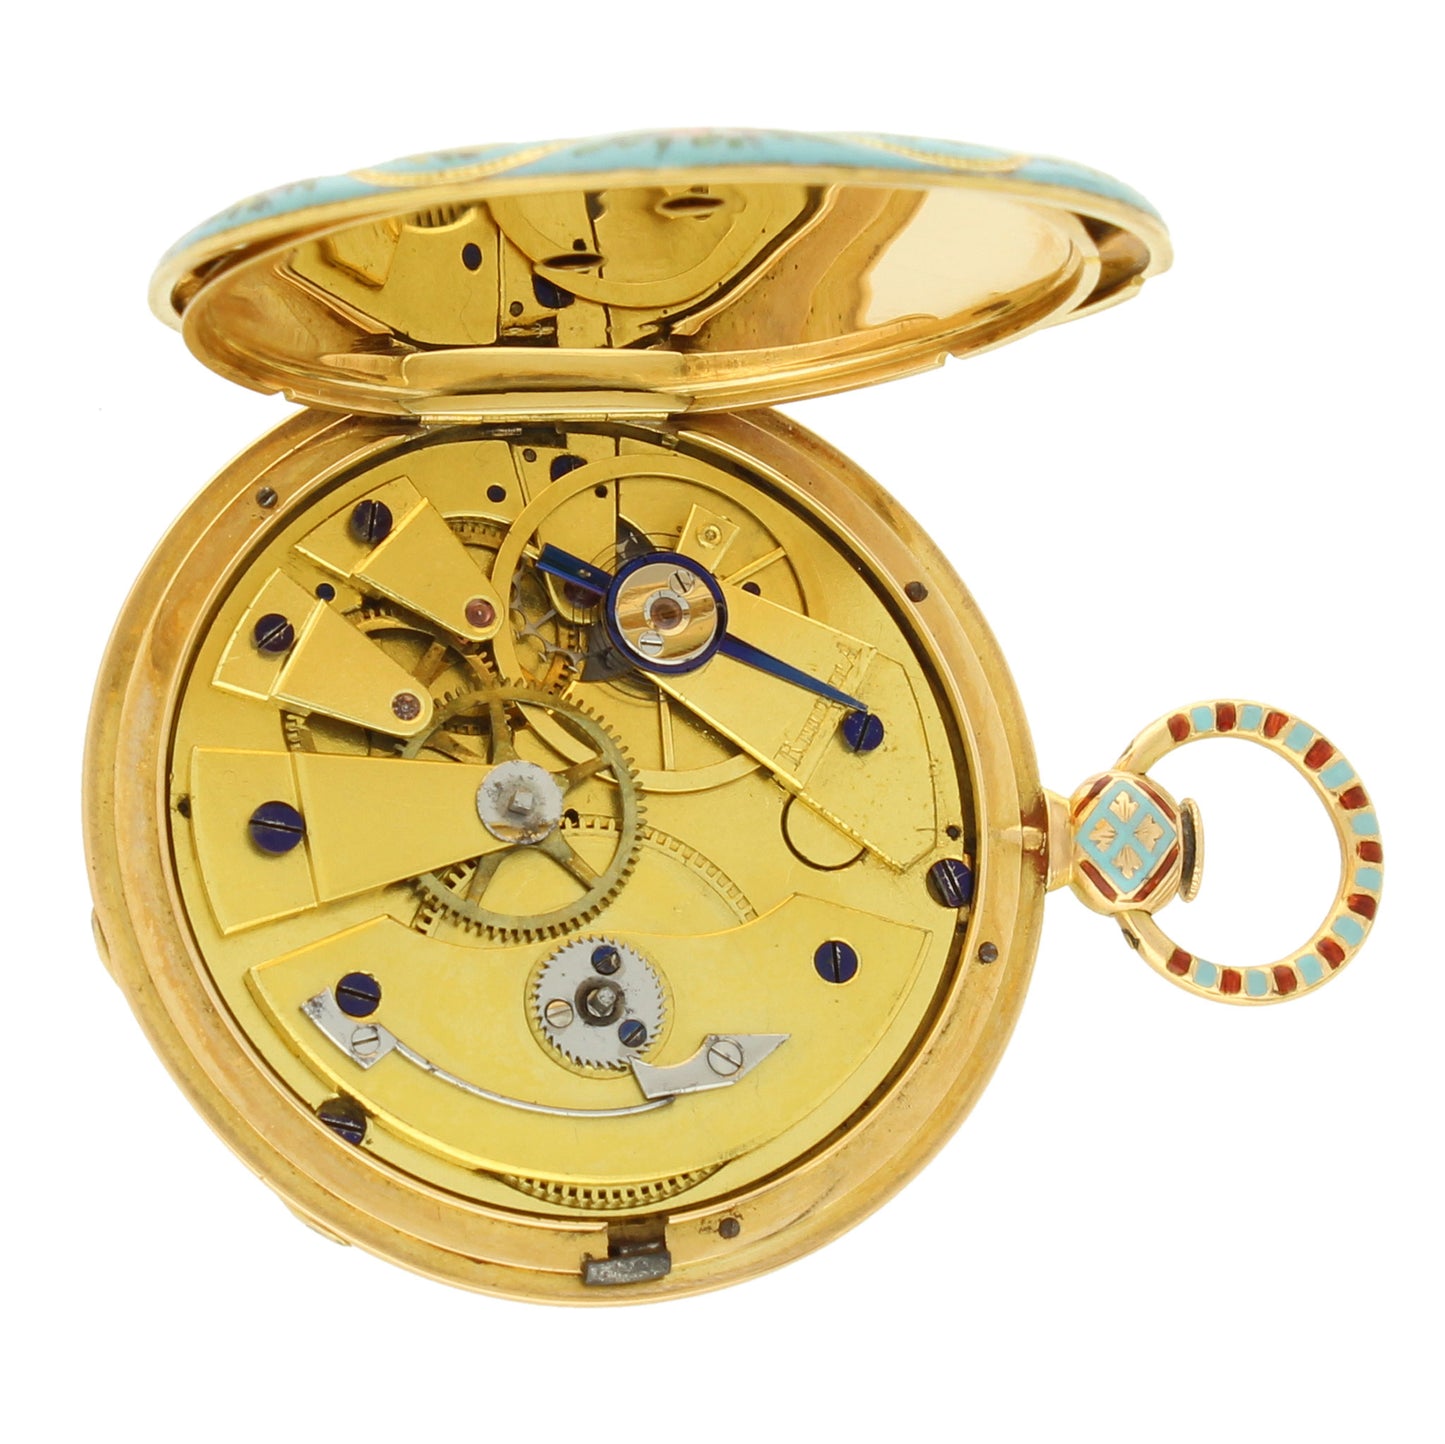 18ct yellow gold and enamel set open face pocket watch. Made for the Turkish Market. Circa 1840